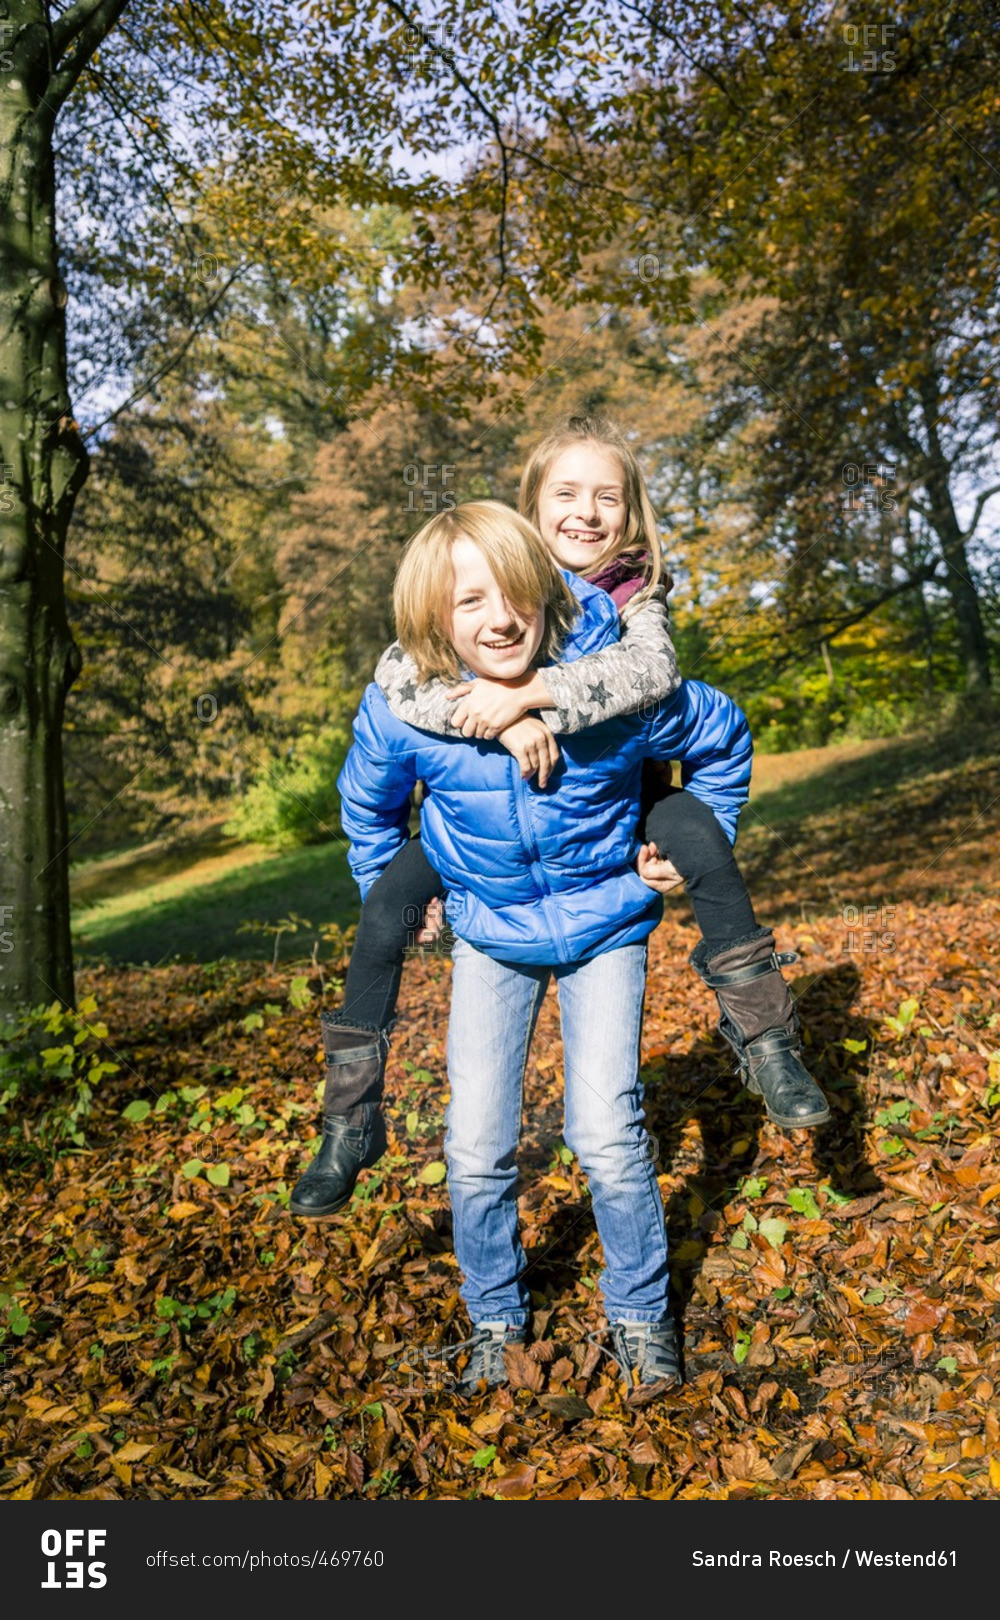 Portrait of boy giving his sister a piggy back ride in autumn